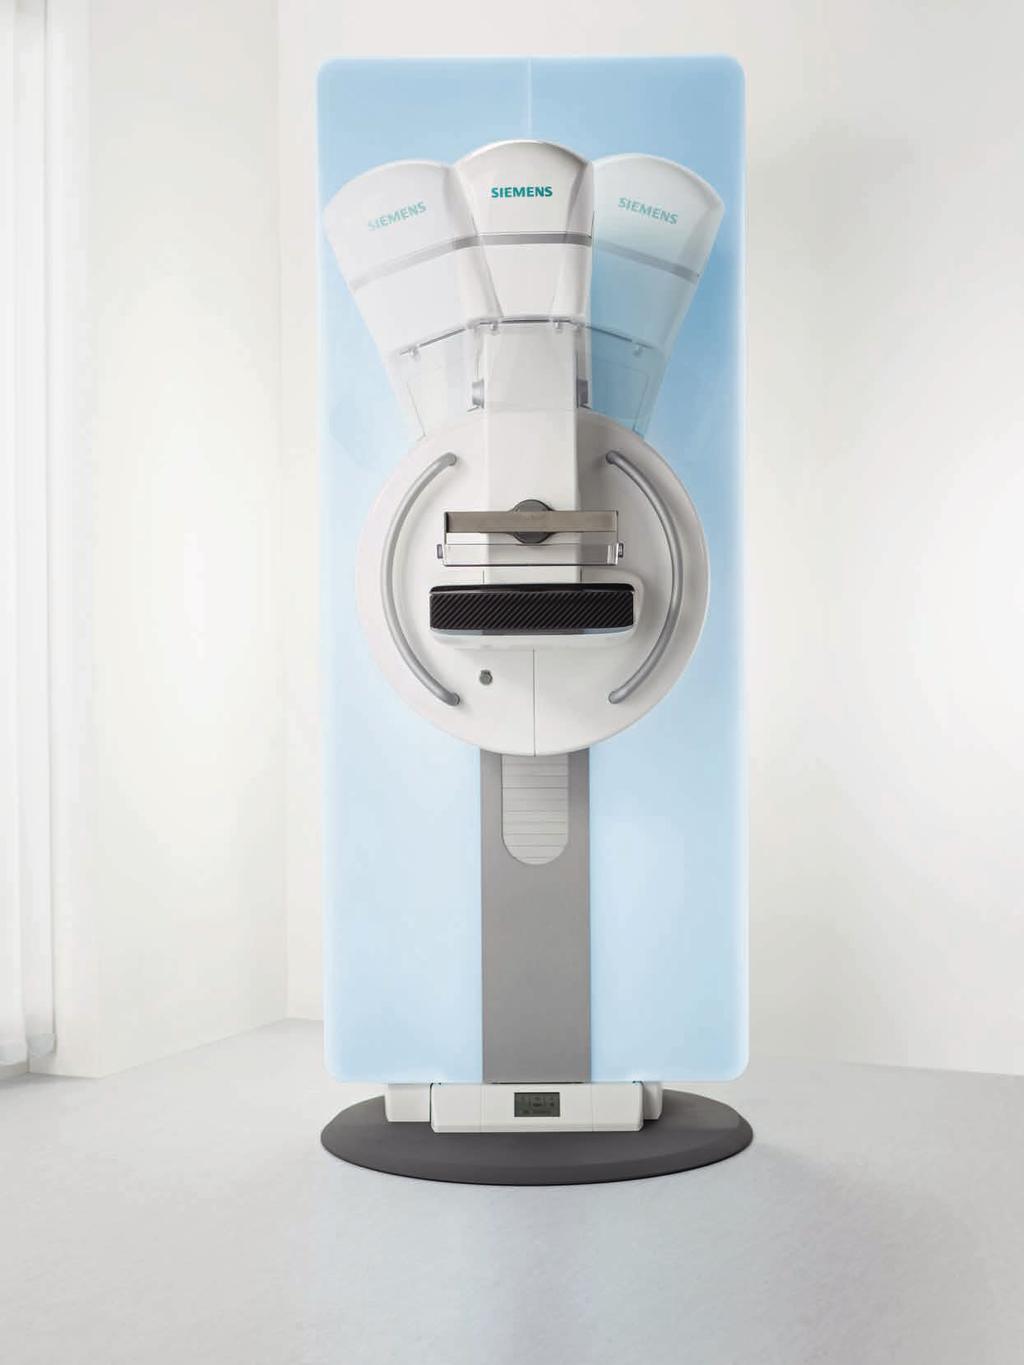 With its wide, 50 angle perspective, only Siemens tomosynthesis can generate real 3D images. To me, there s no better choice.